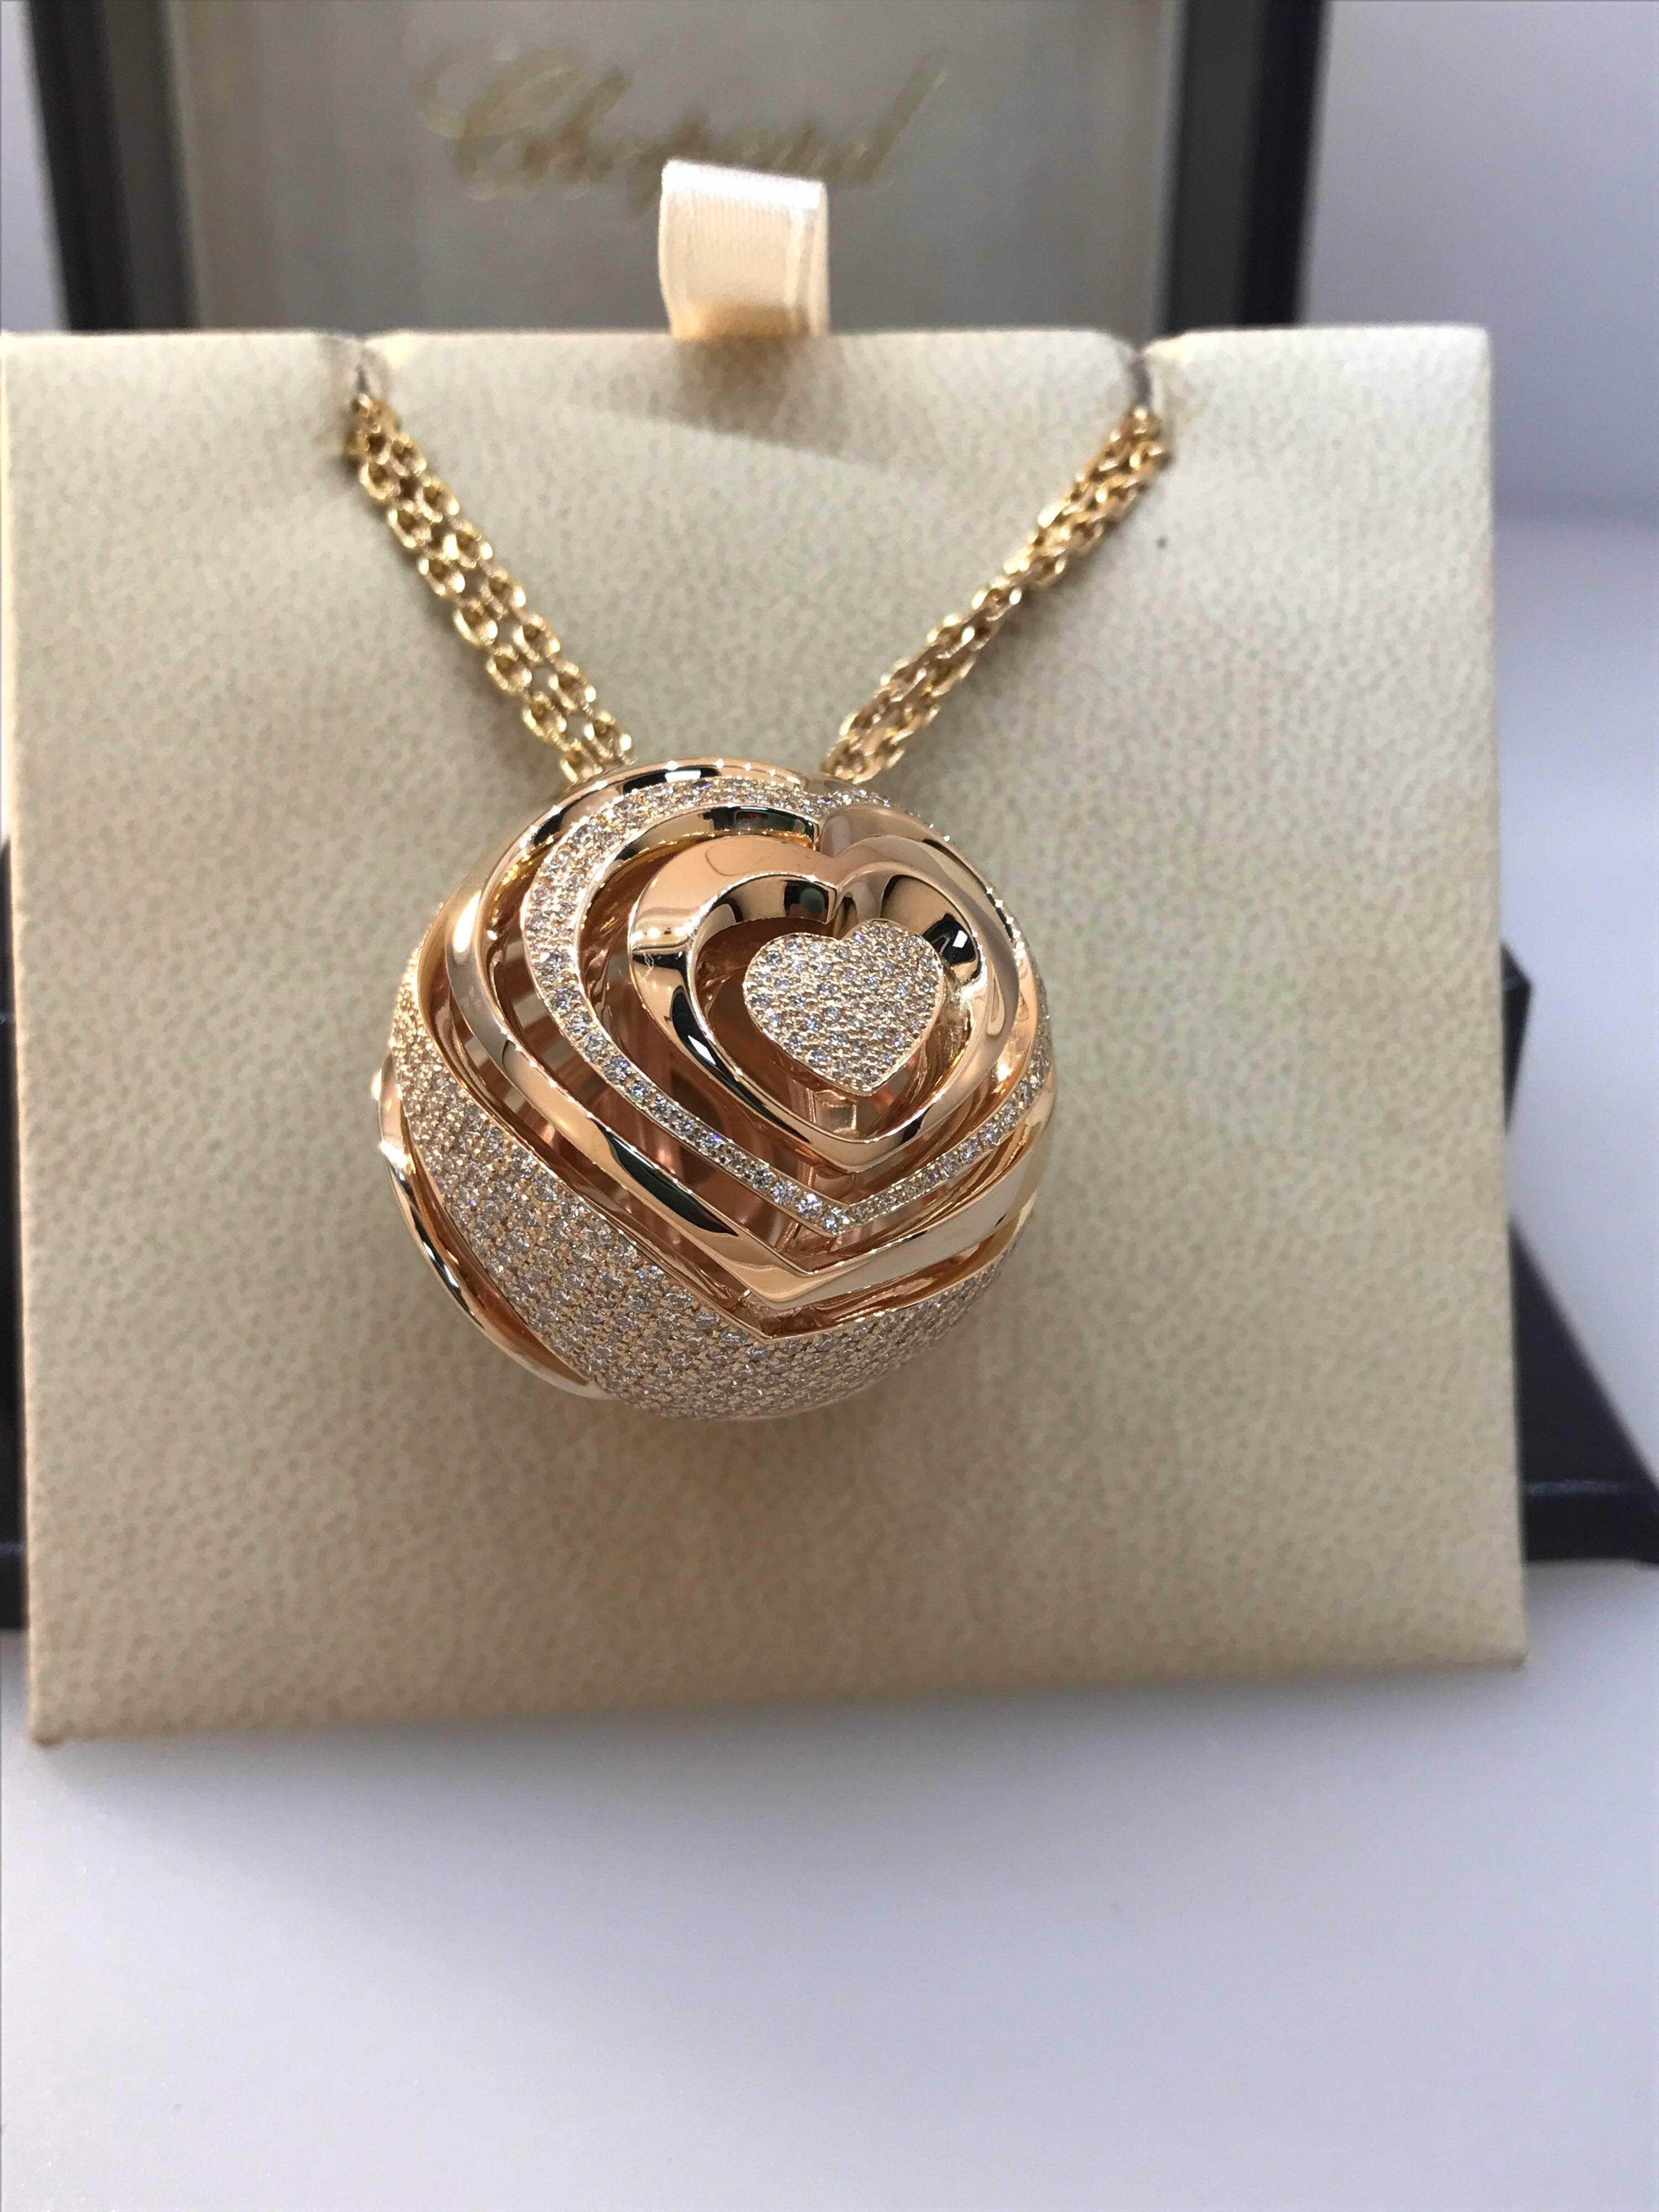 Chopard Xtravaganza Pendant / Necklace

Model Number: 79/6978-5001

100% Authentic

Brand New

Comes with original Chopard box, certificate of authenticity and warranty, and jewels manual

18 Karat Rose Gold 

Pendant weight: 64.30gr

579 Diamonds